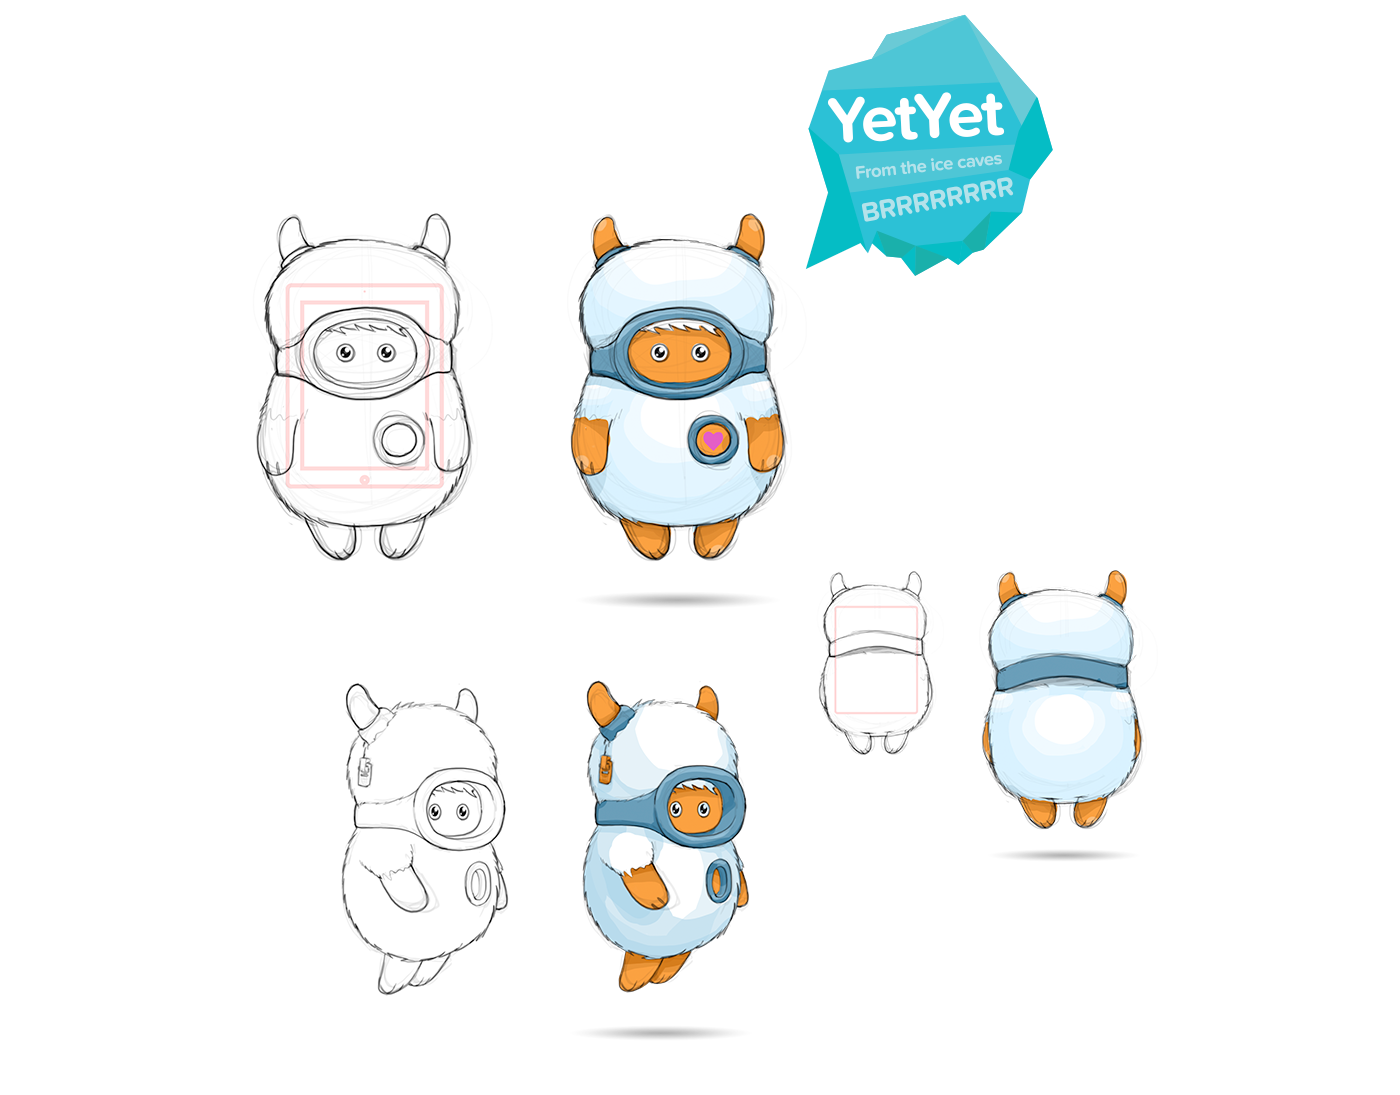 toy 'toy design' app application case 'Product Design' Character product possible interactive 'ipad case' 'Iphone case'